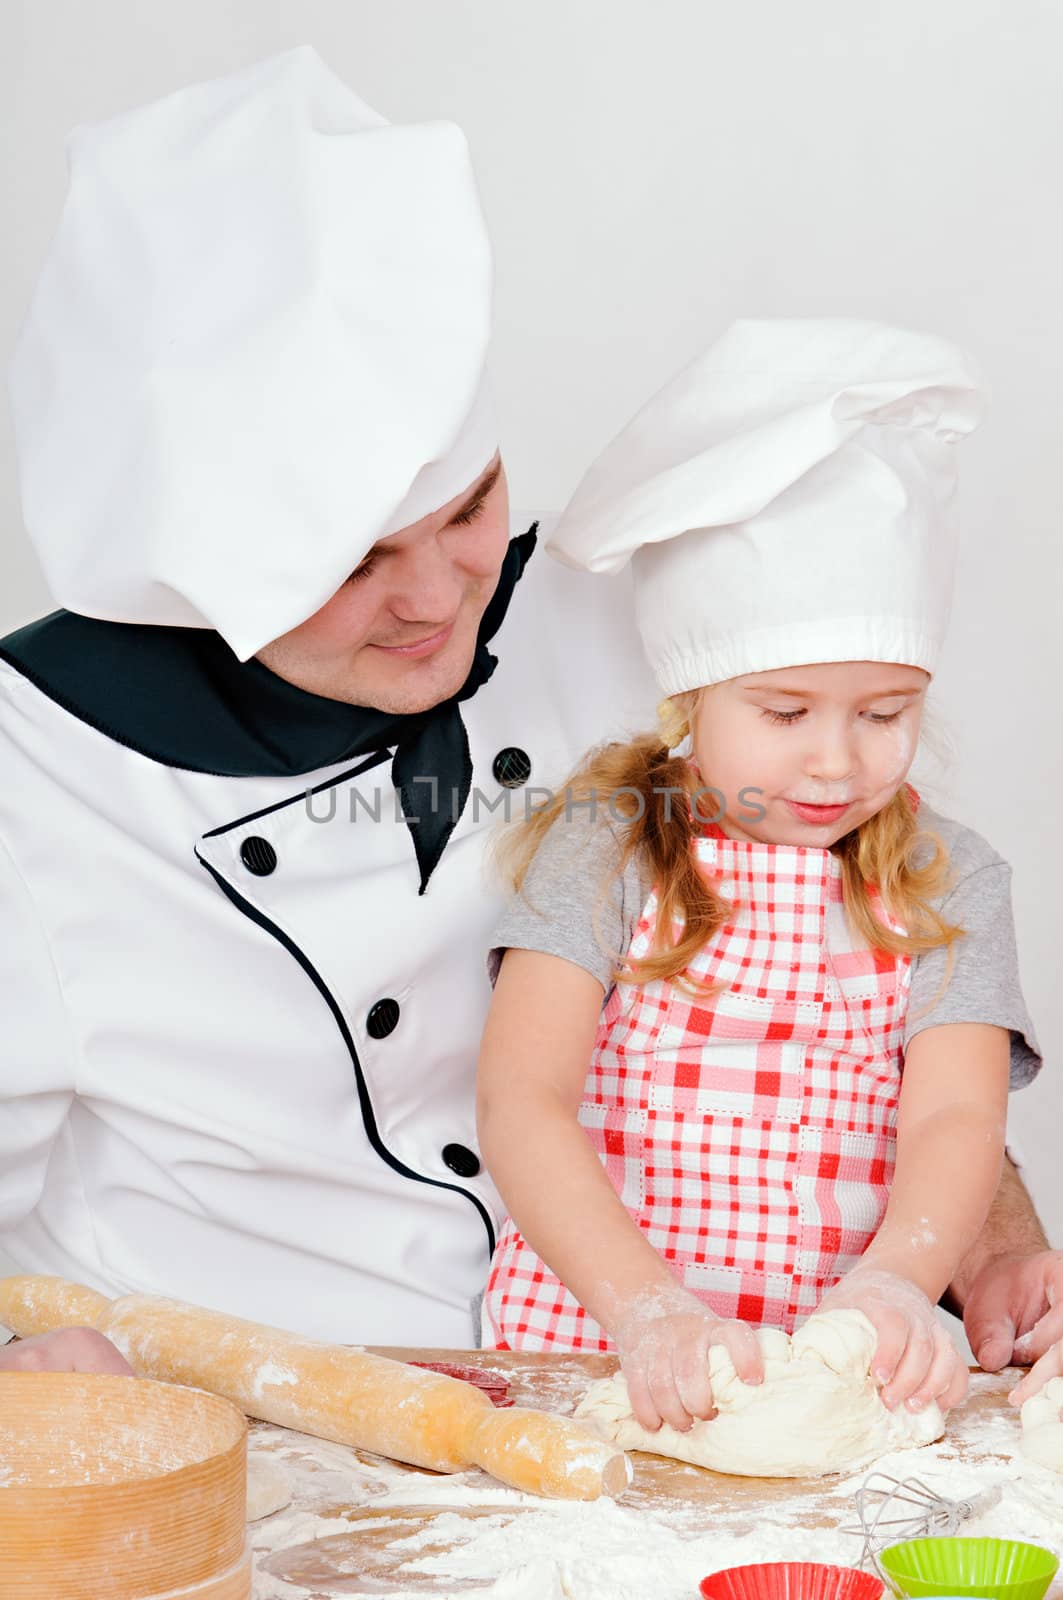 chef with girl by uriy2007